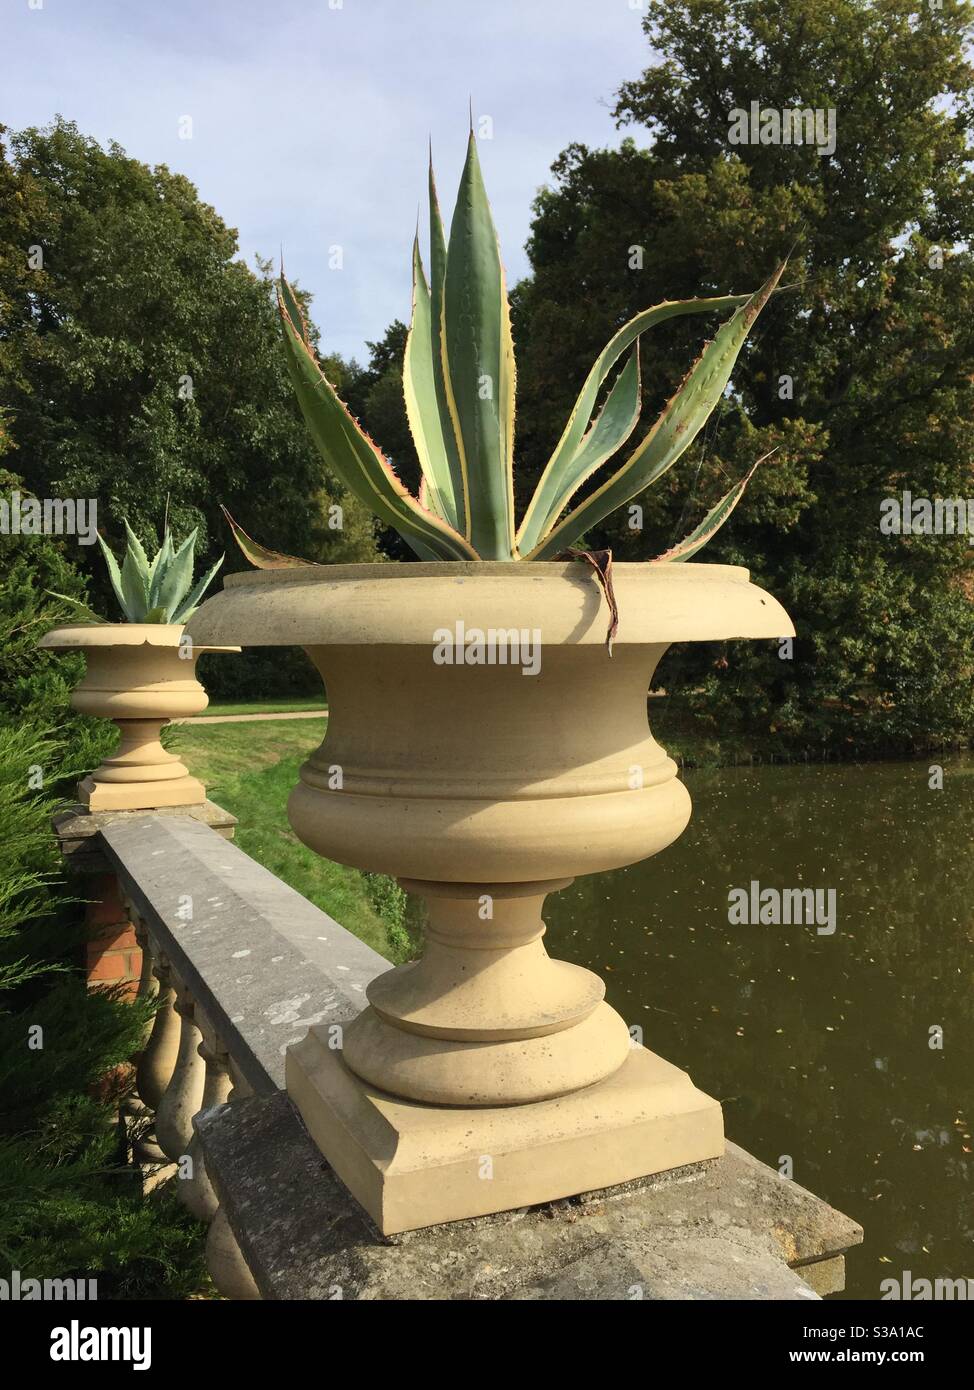 Agave americana in classic garden planters Stock Photo